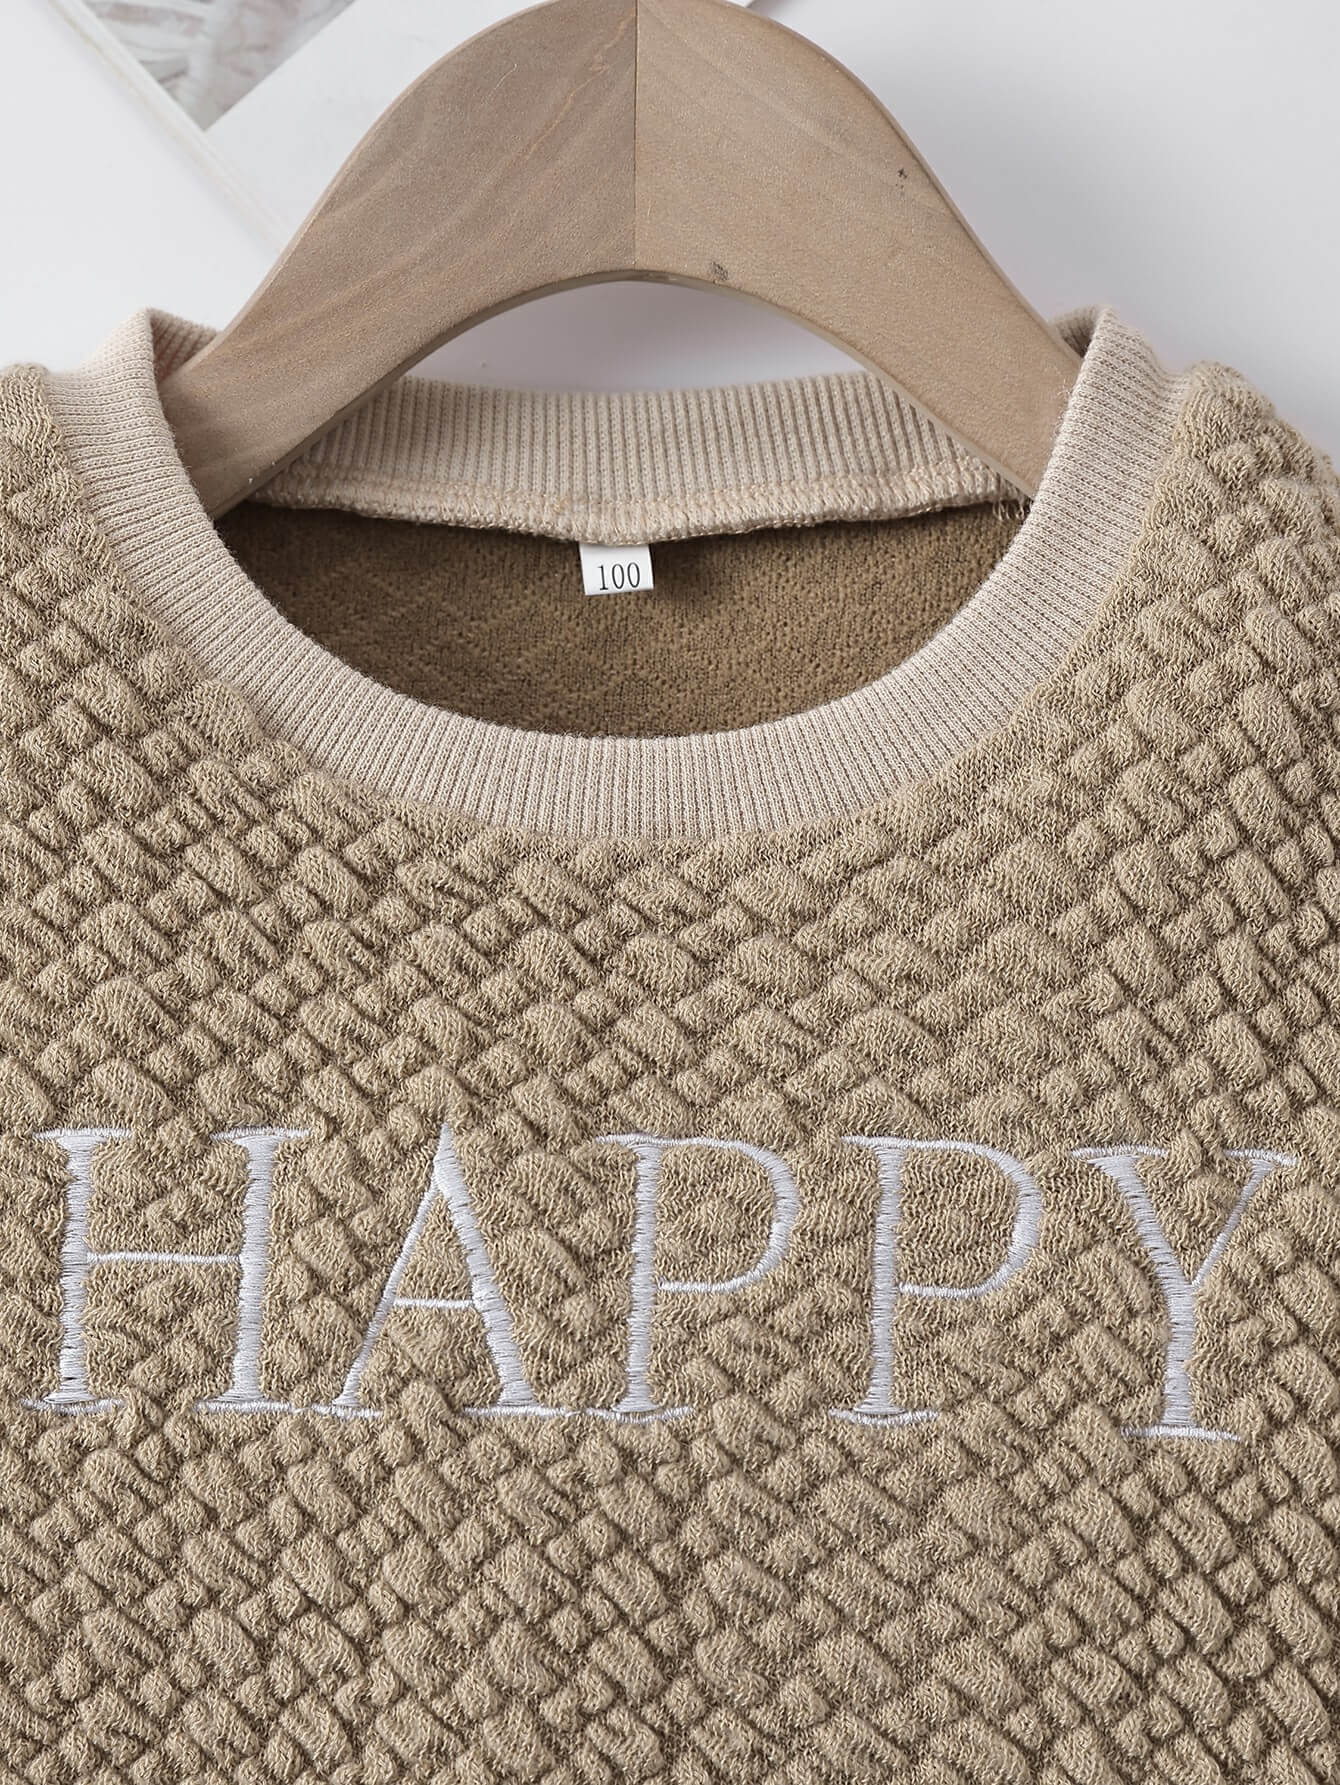 Kids HAPPY Textured Top and Joggers Set_7